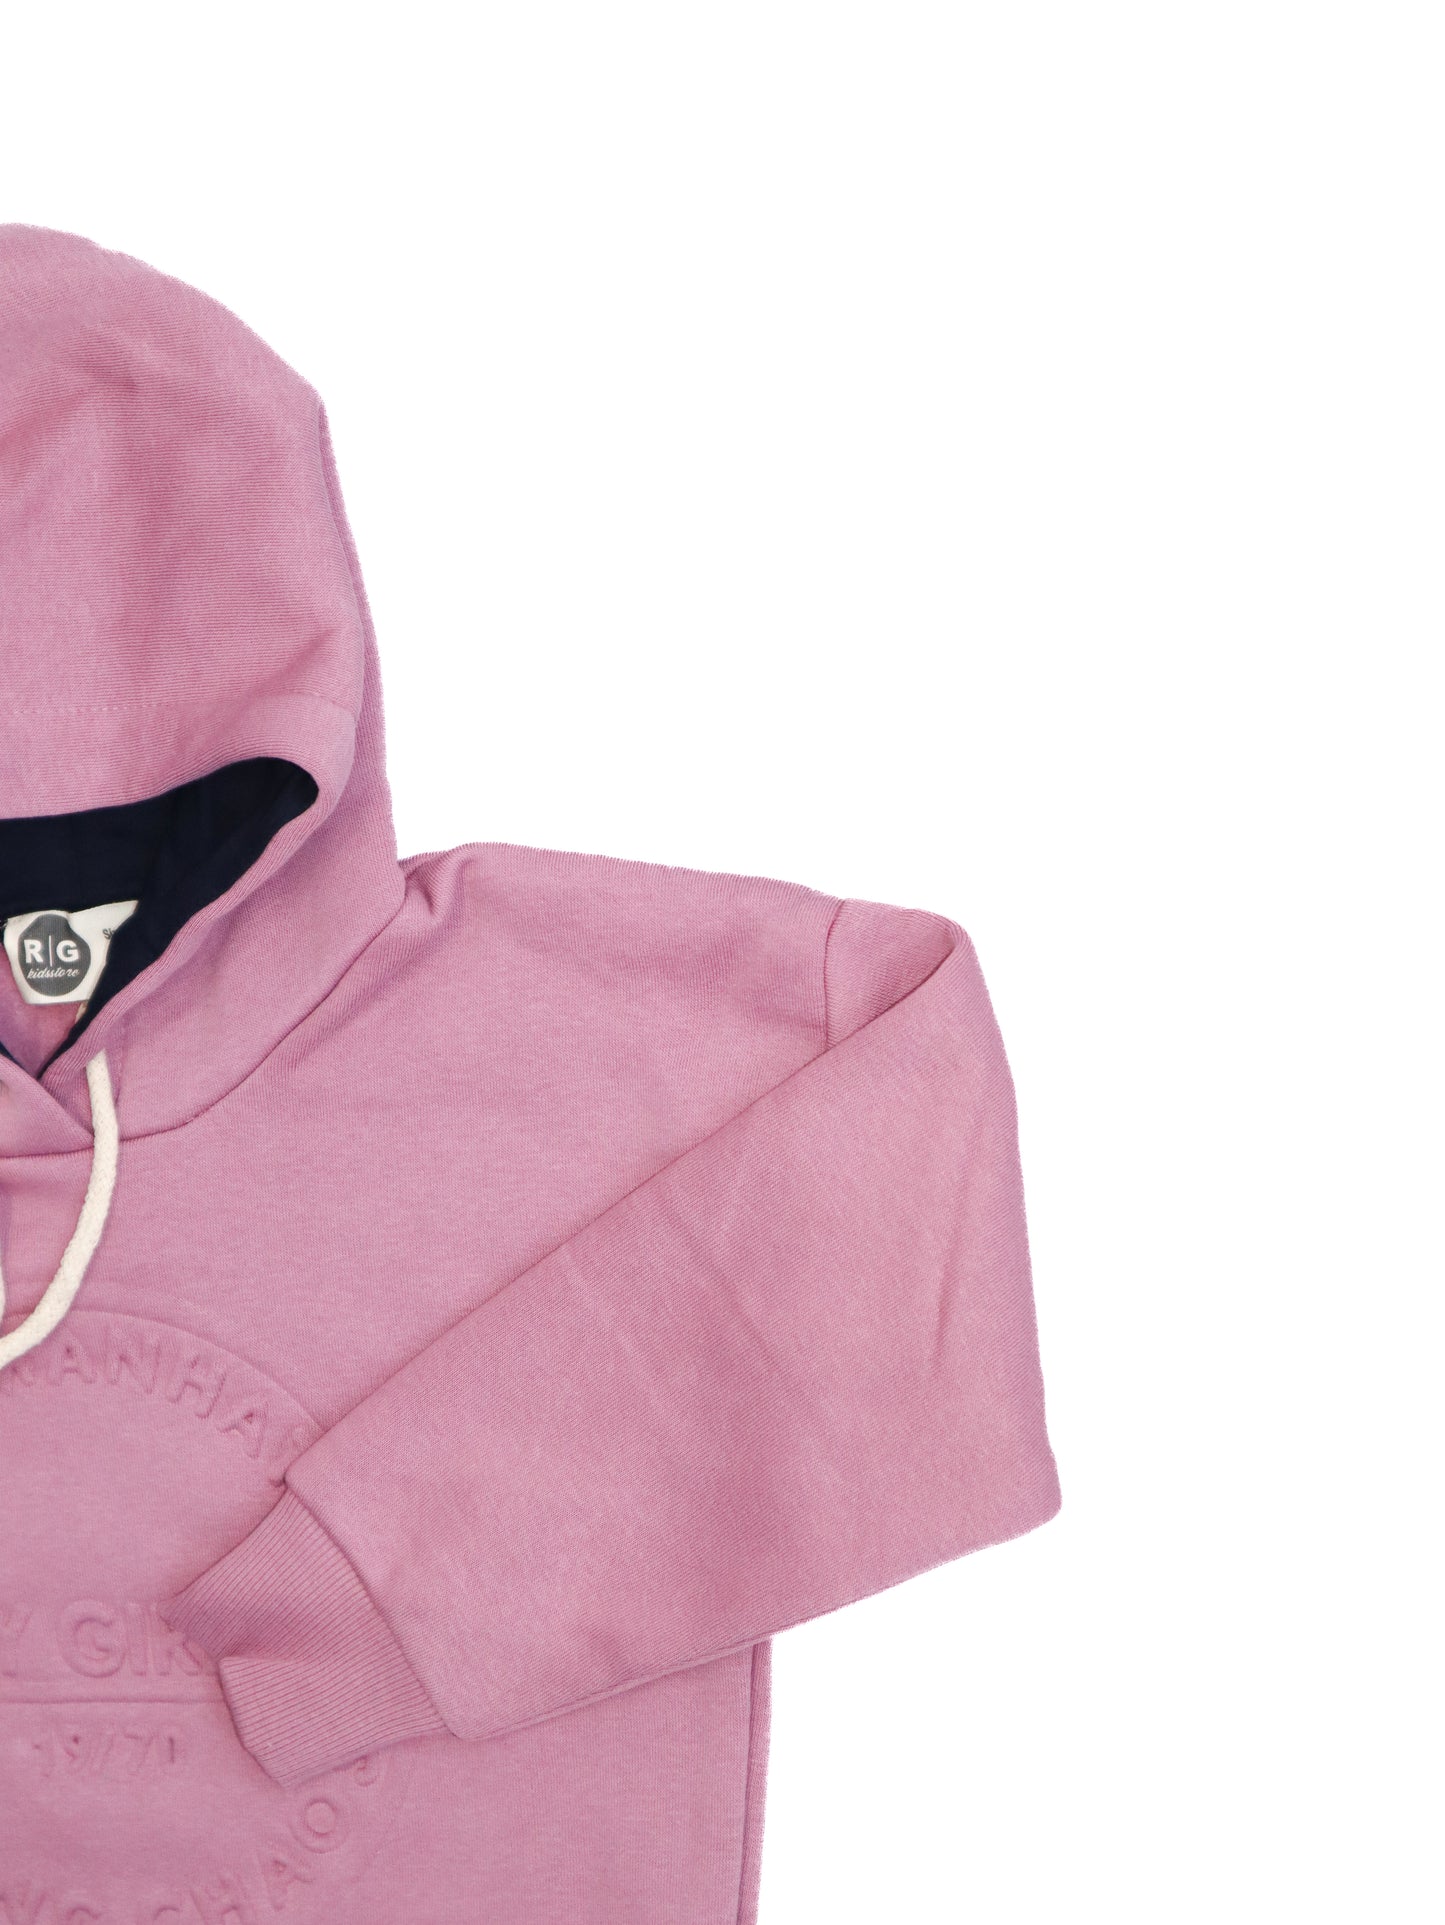 Girl's Hooded and Pocket Sweat Dress